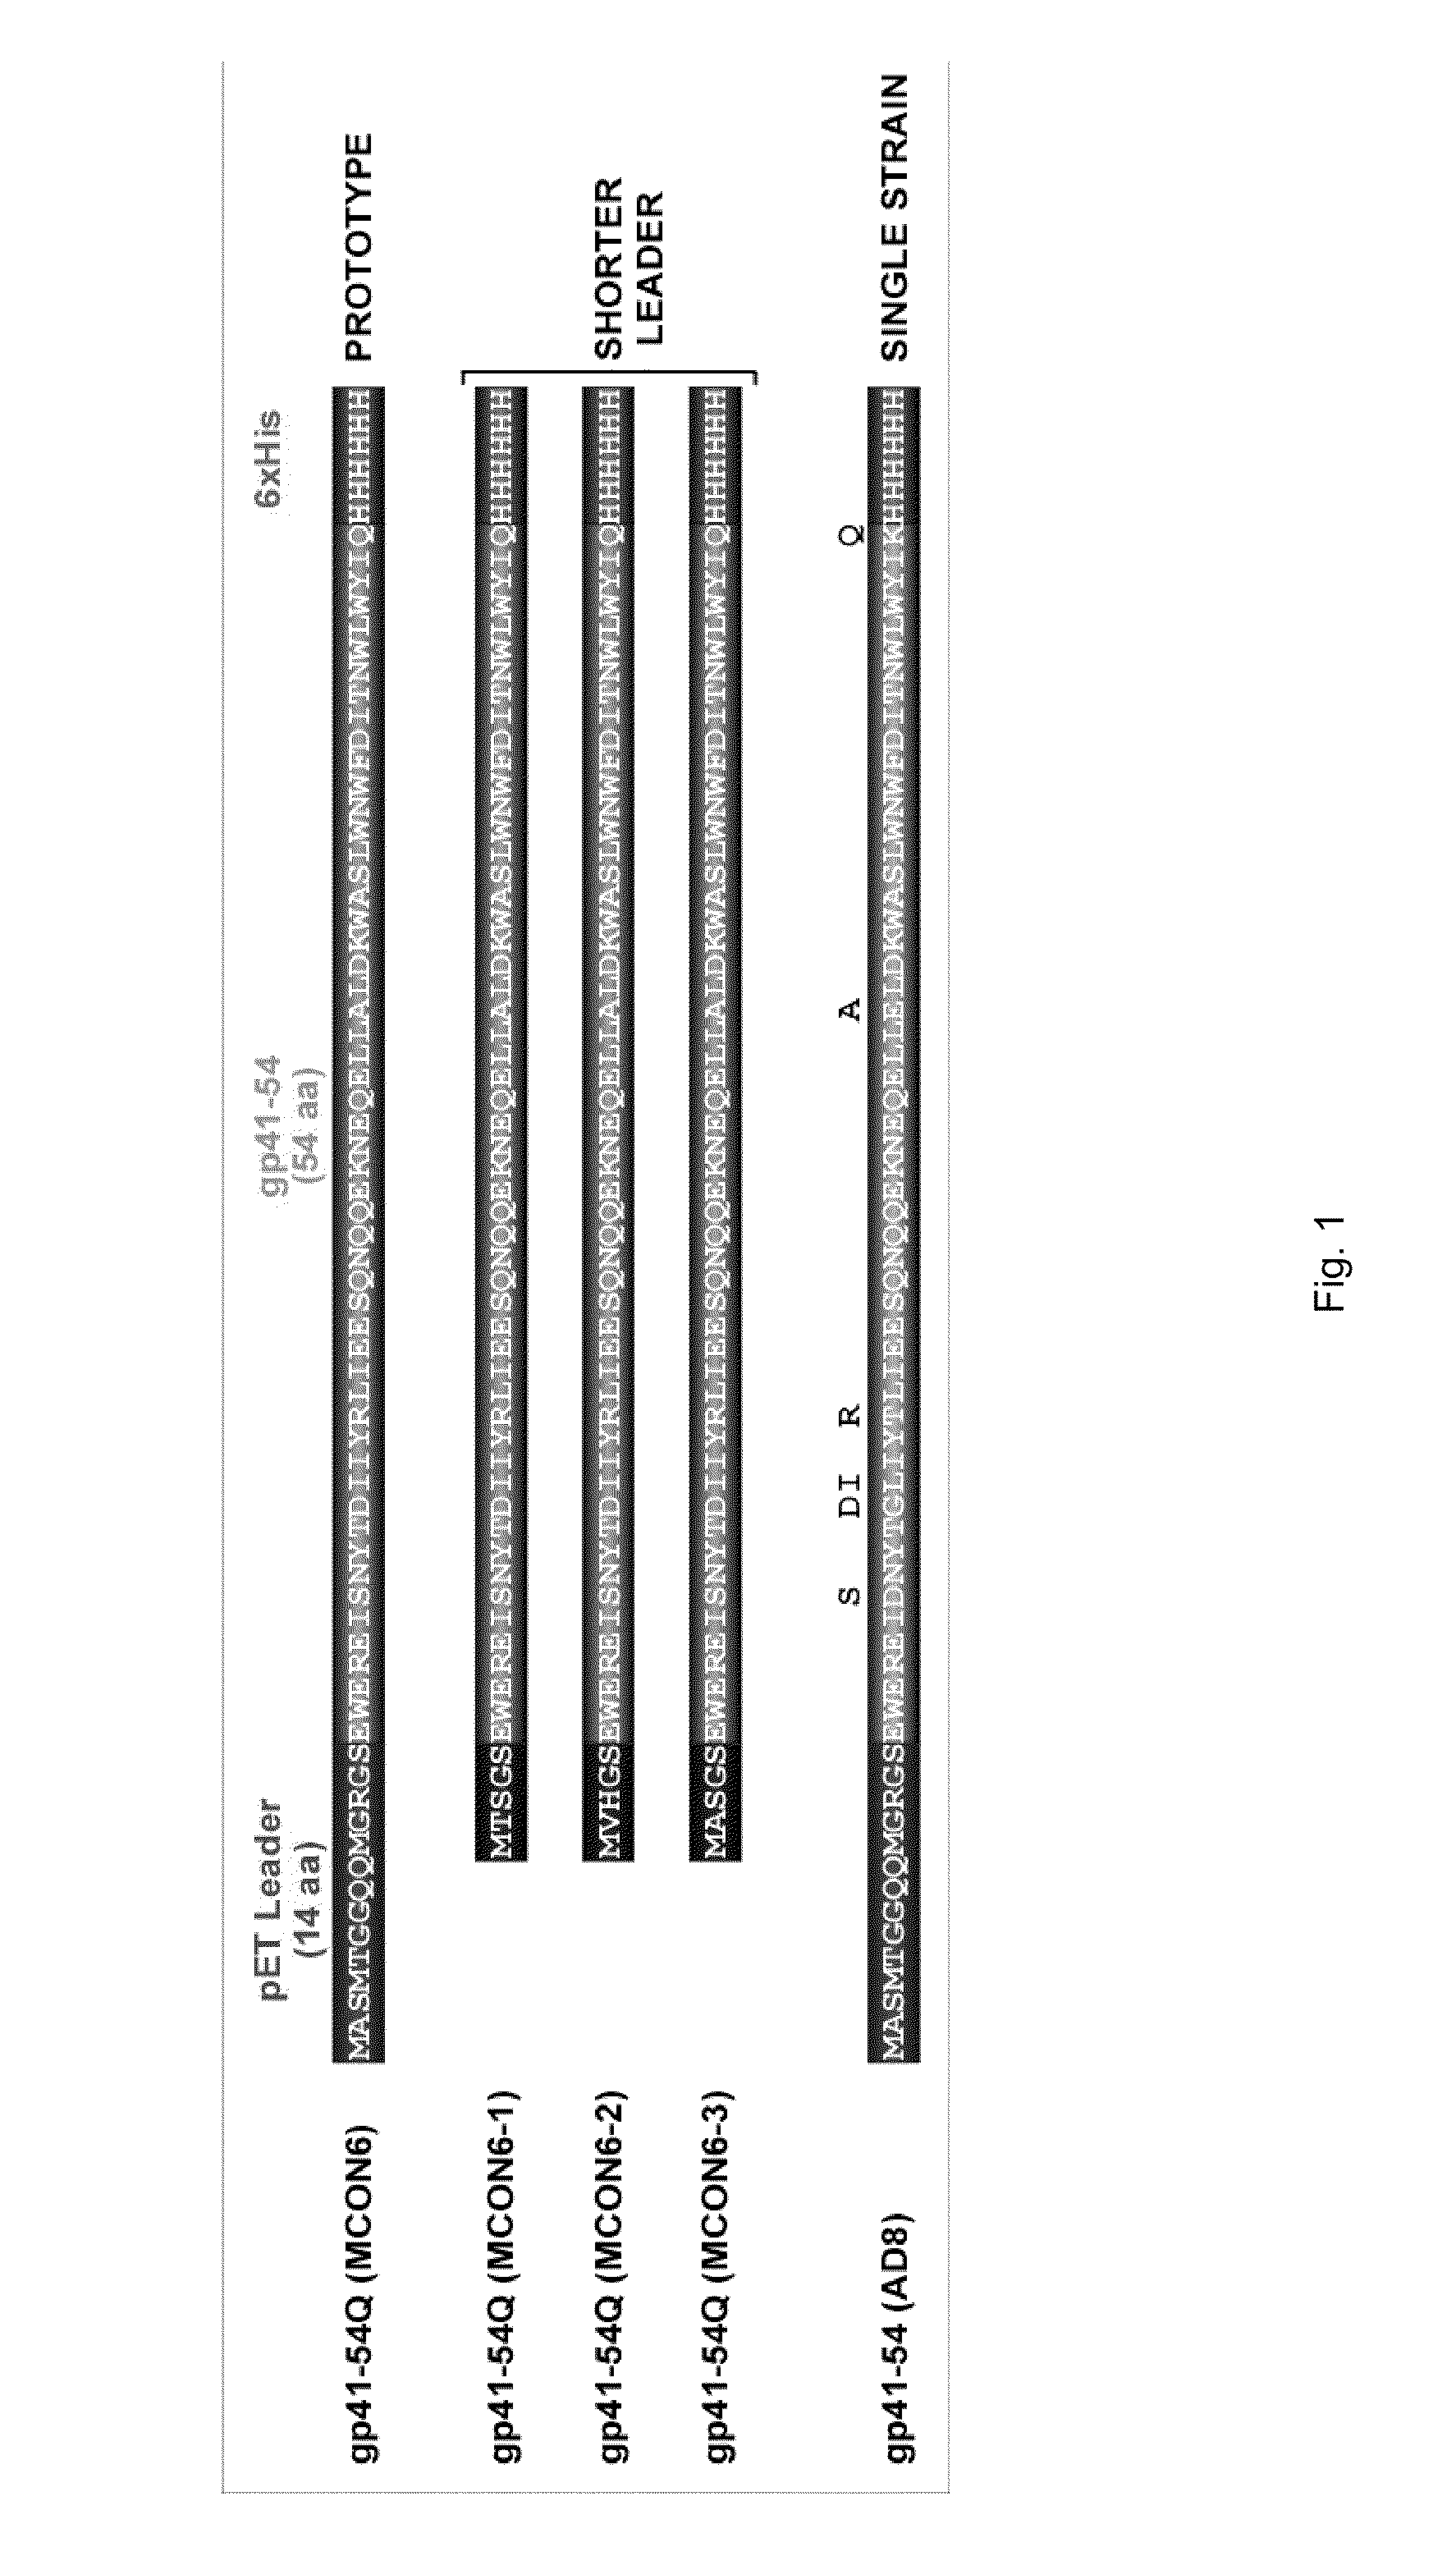 Polypeptides comprising epitopes of HIV gp41 and methods of use